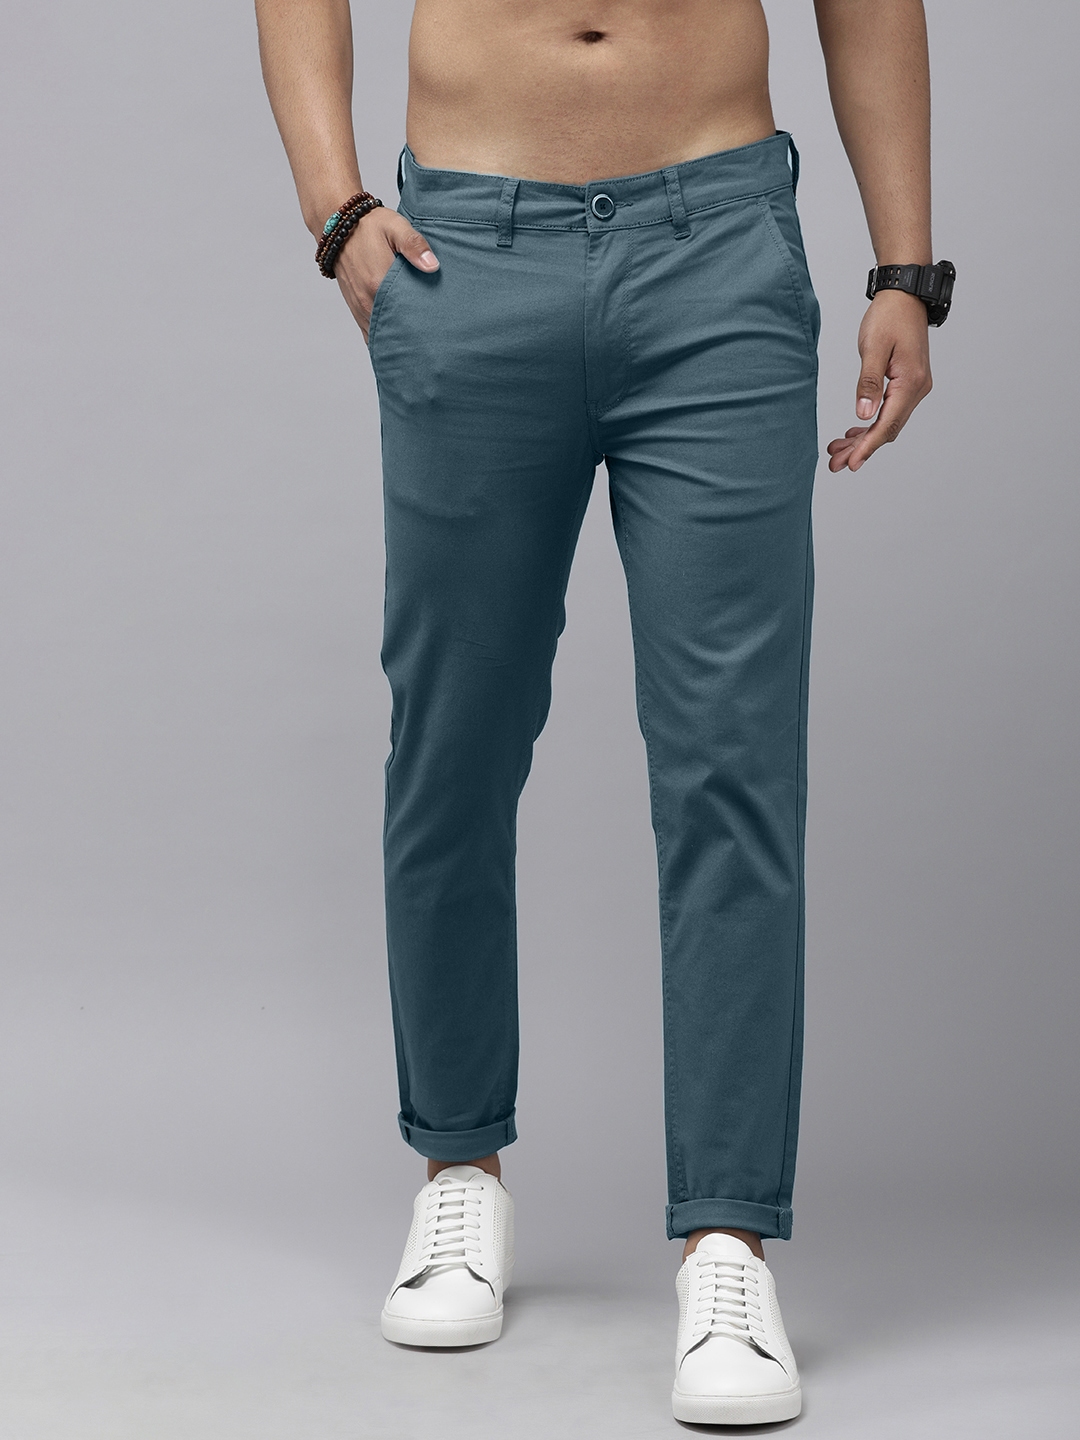 Buy Roadster Men Teal Green Chinos - Trousers for Men 14638600 | Myntra